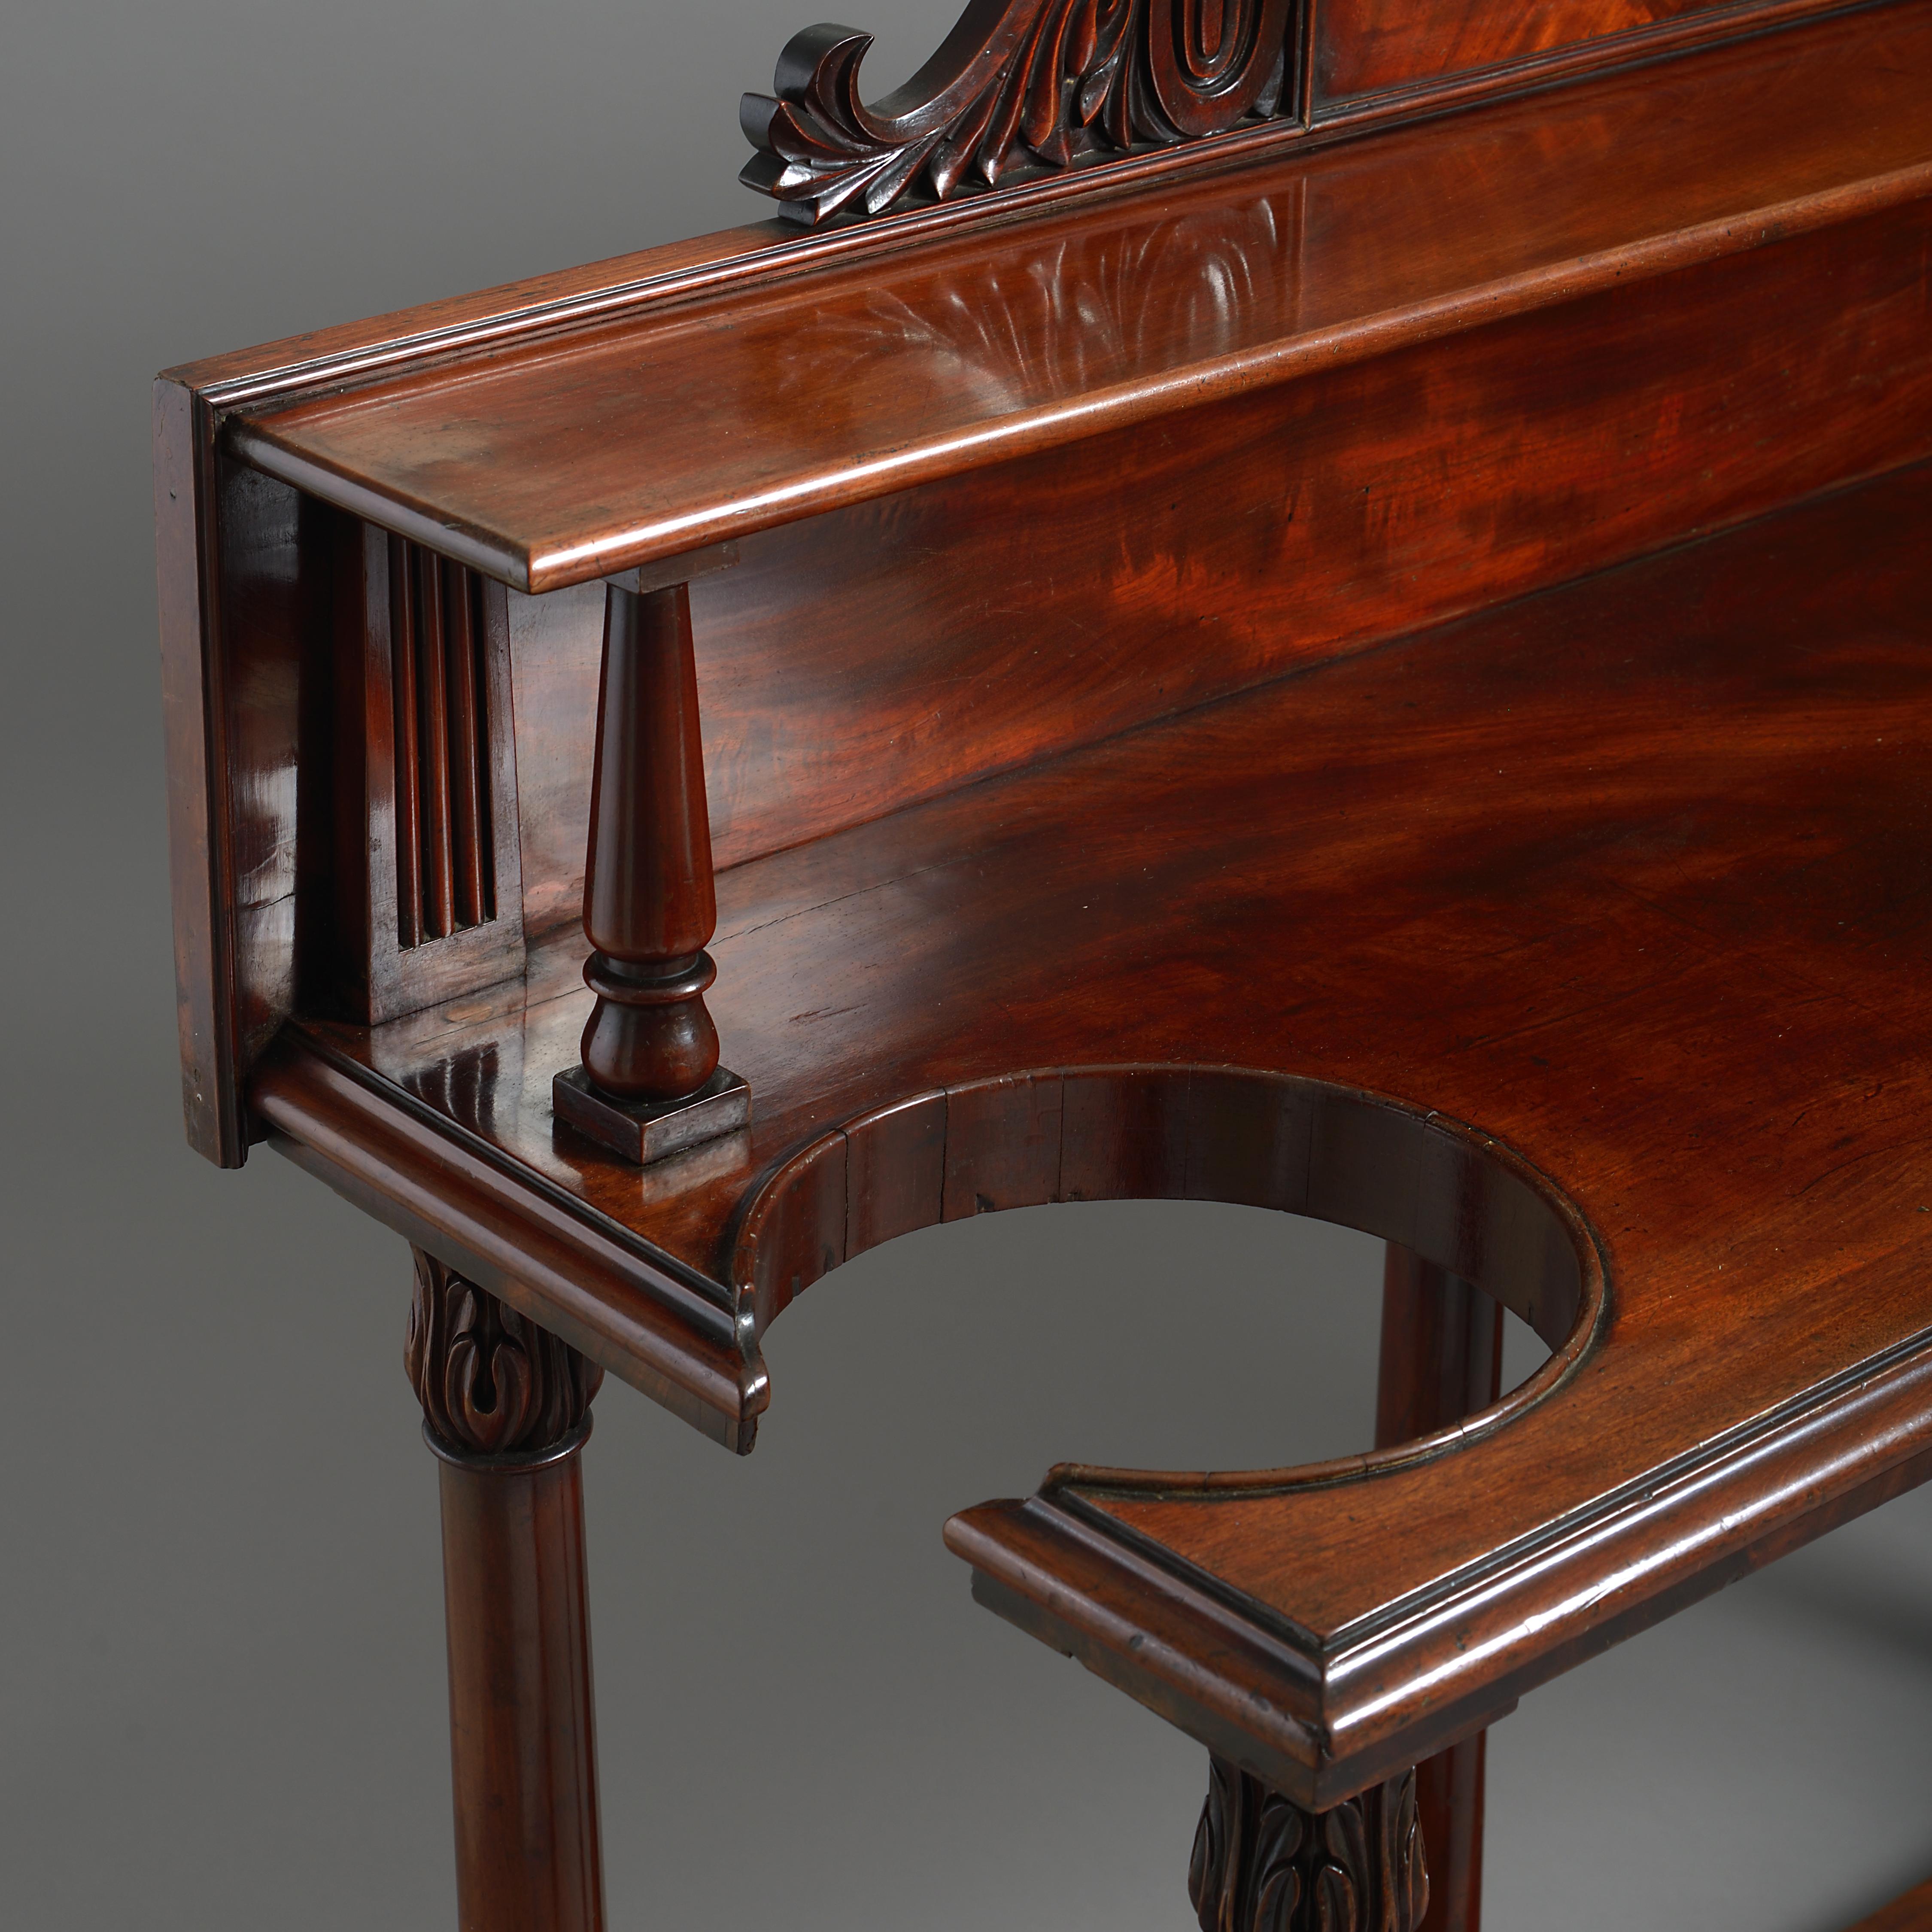 An unusual early Victorian mahogany hall-table, with apertures for sticks and a central frieze drawer, circa 1840.